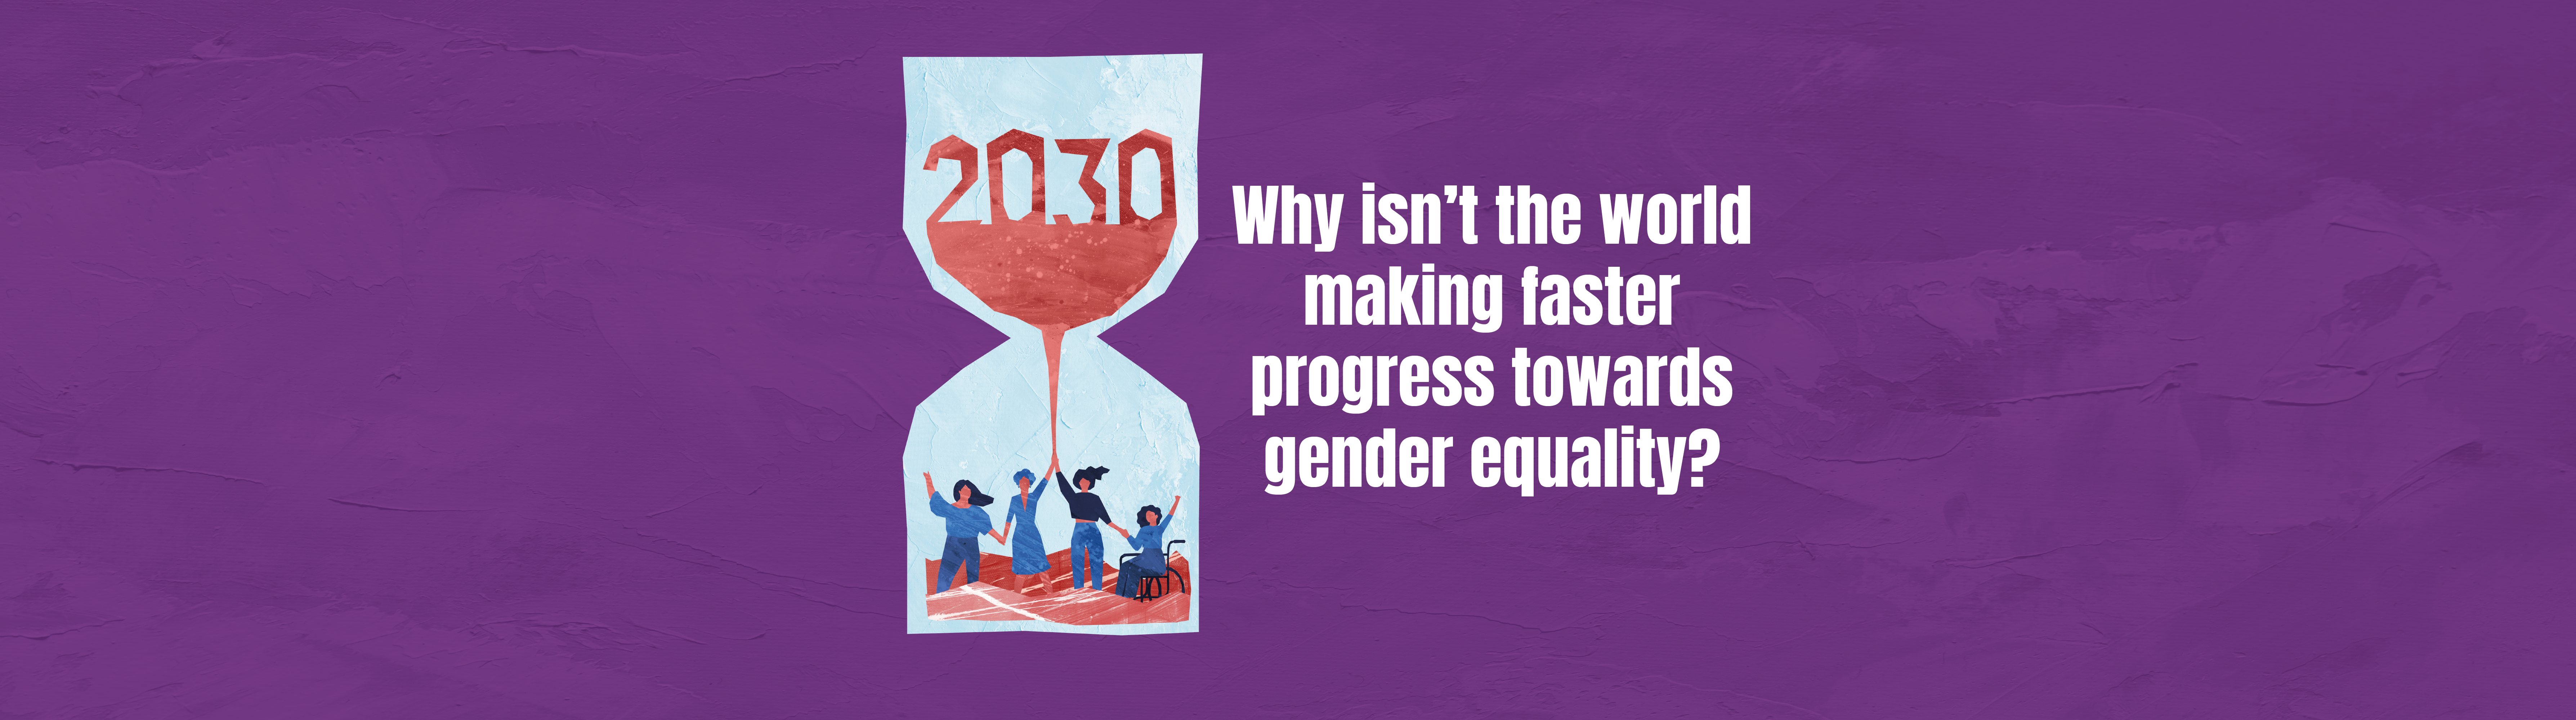 The world is becoming more gender equal but not fast enough. Here’s why. 